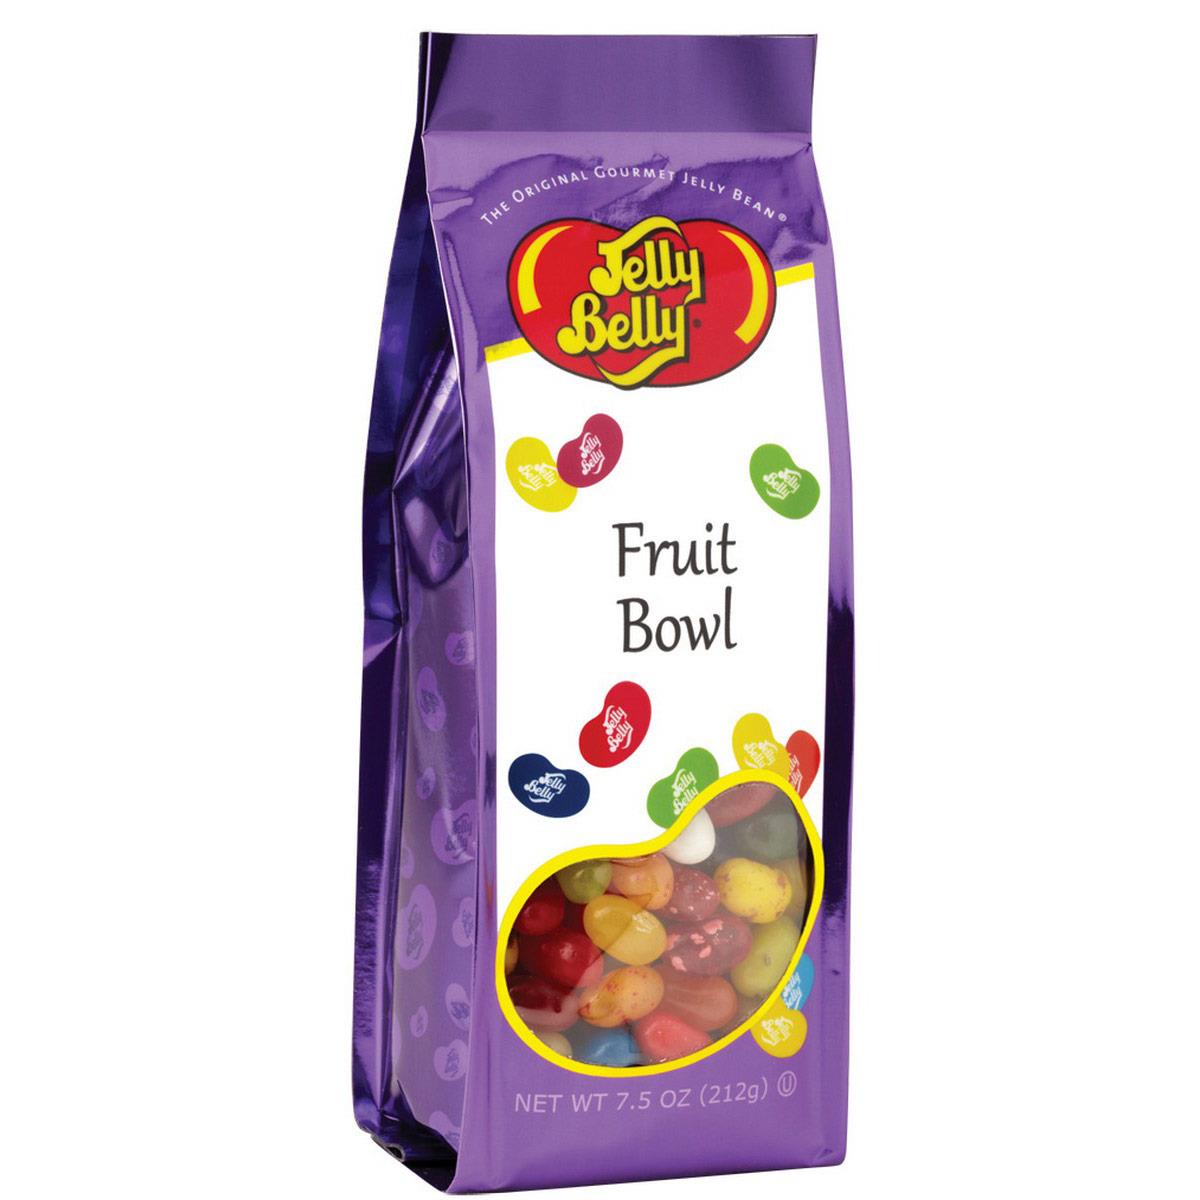 Jelly Belly Fruit Bowl Jelly Beans - 7.5oz